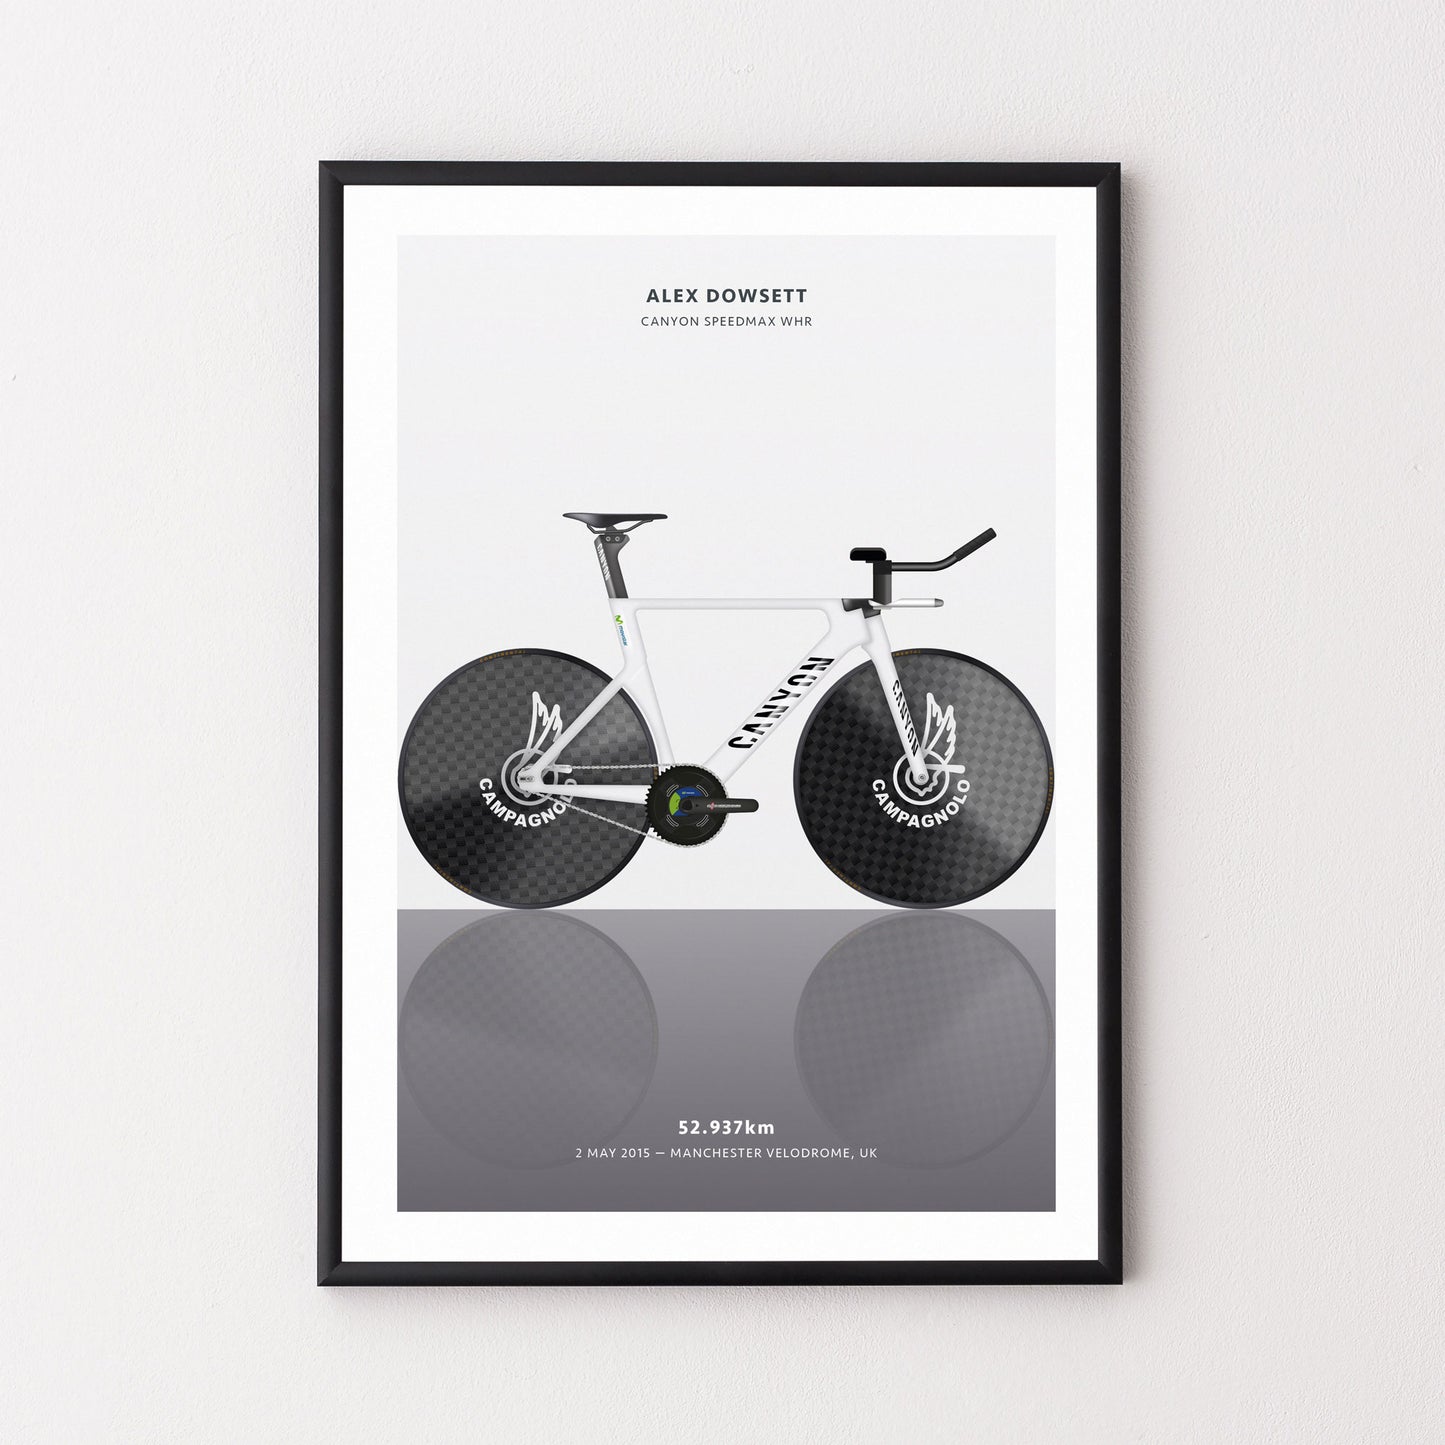 Alex Dowsett Hour Record – Poster – The English Cyclist